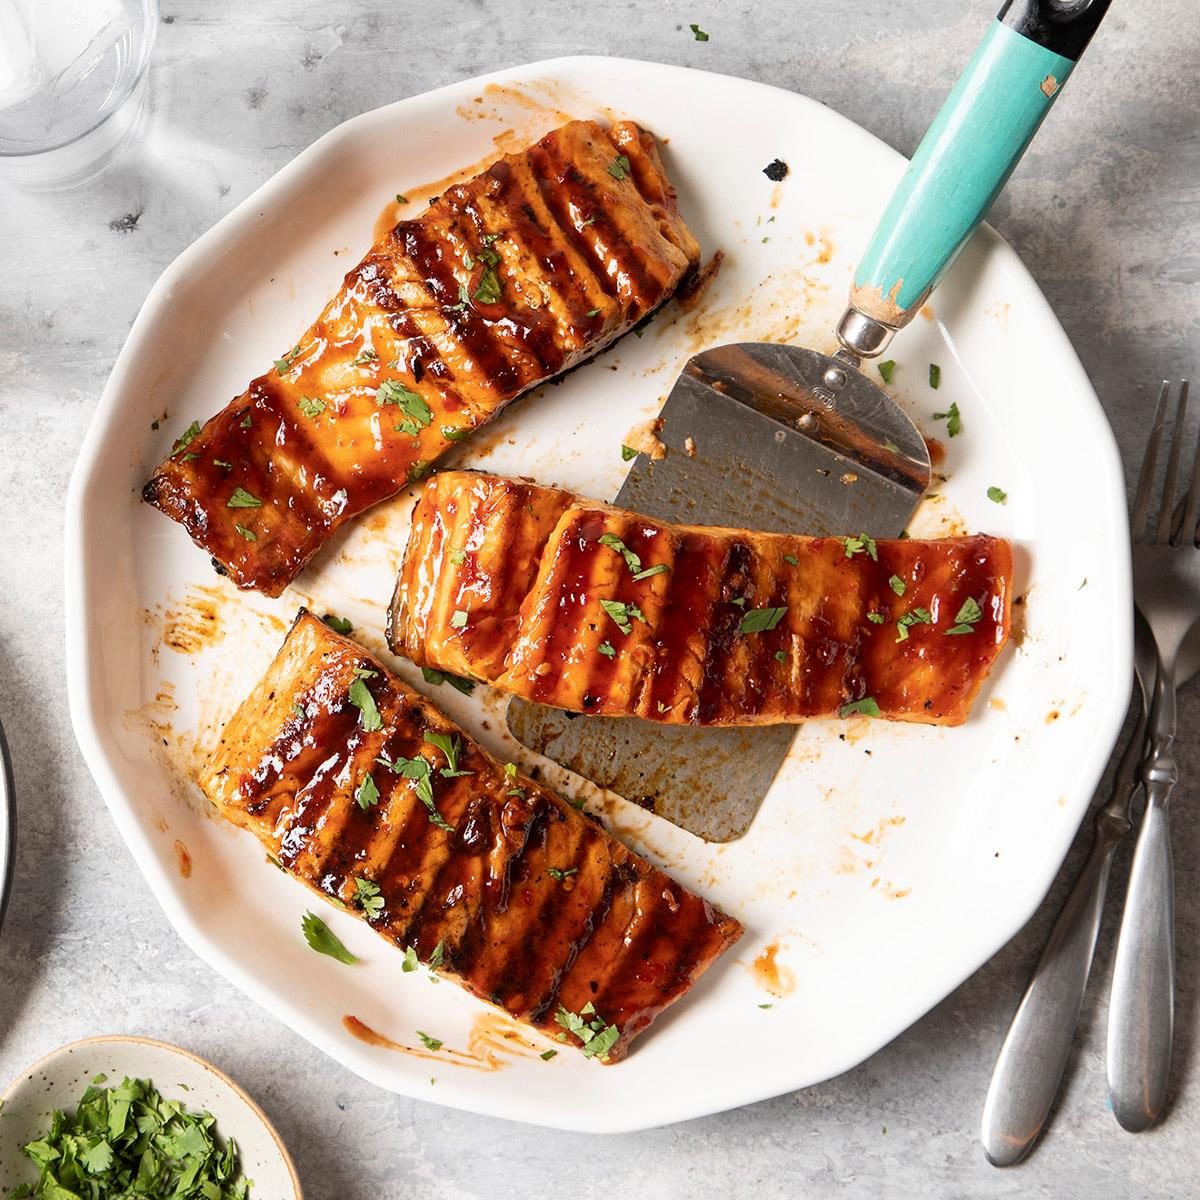 Grilled Barbecued Salmon Recipe: How to Make It